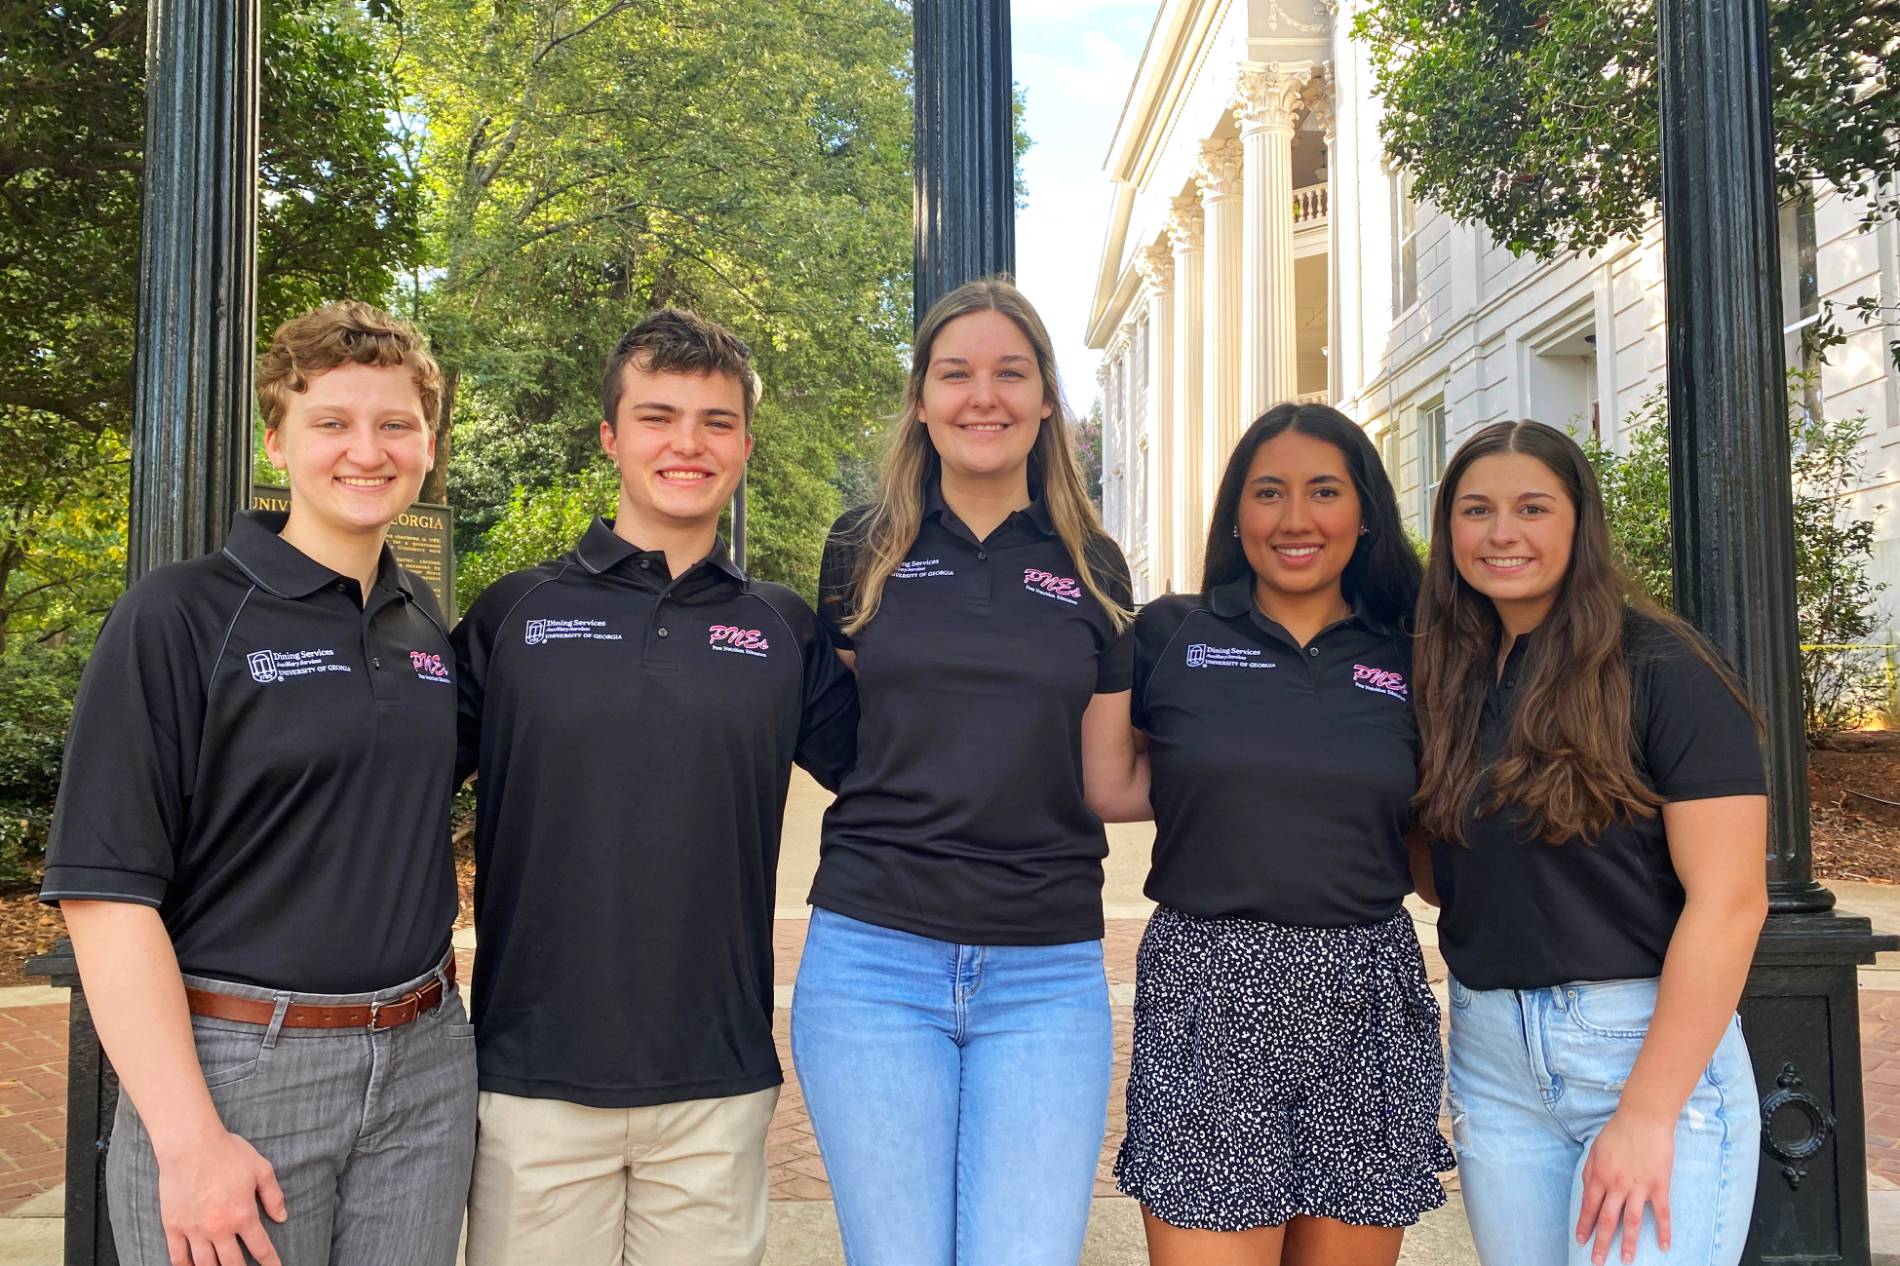 Five students wearing matching black shirts with the acronym "PNEs" stand in front of the UGA Arch and smile at the camera.